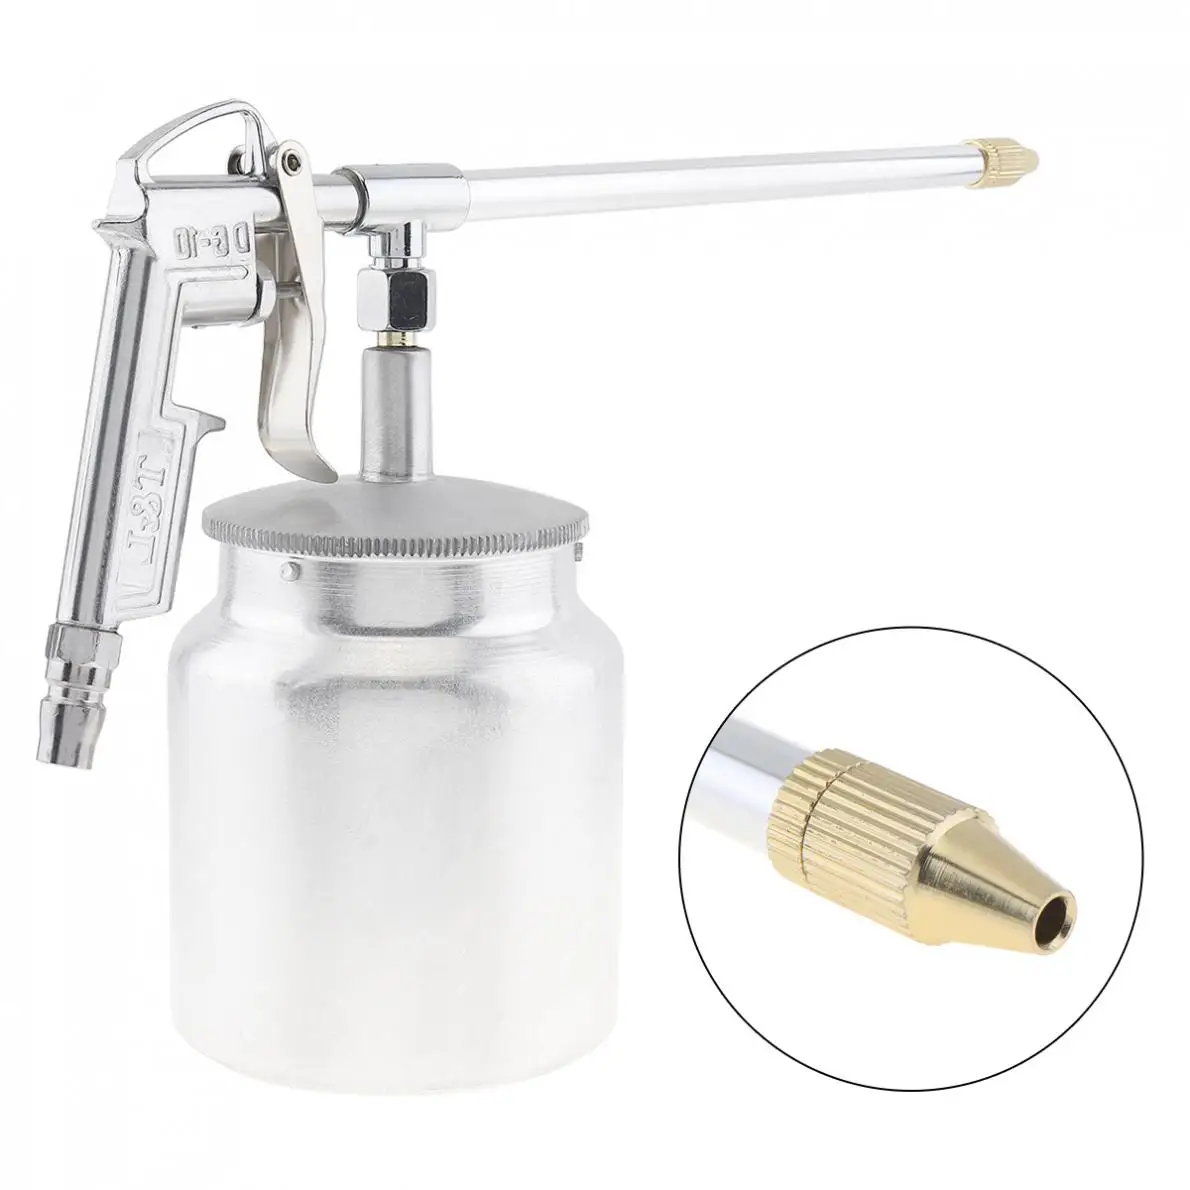 1-5pcs Easy operate Silver Pot Type Pneumatic Spray Gun with 6mm Nozzle and Aluminum Pot for Furniture Factory Facilities